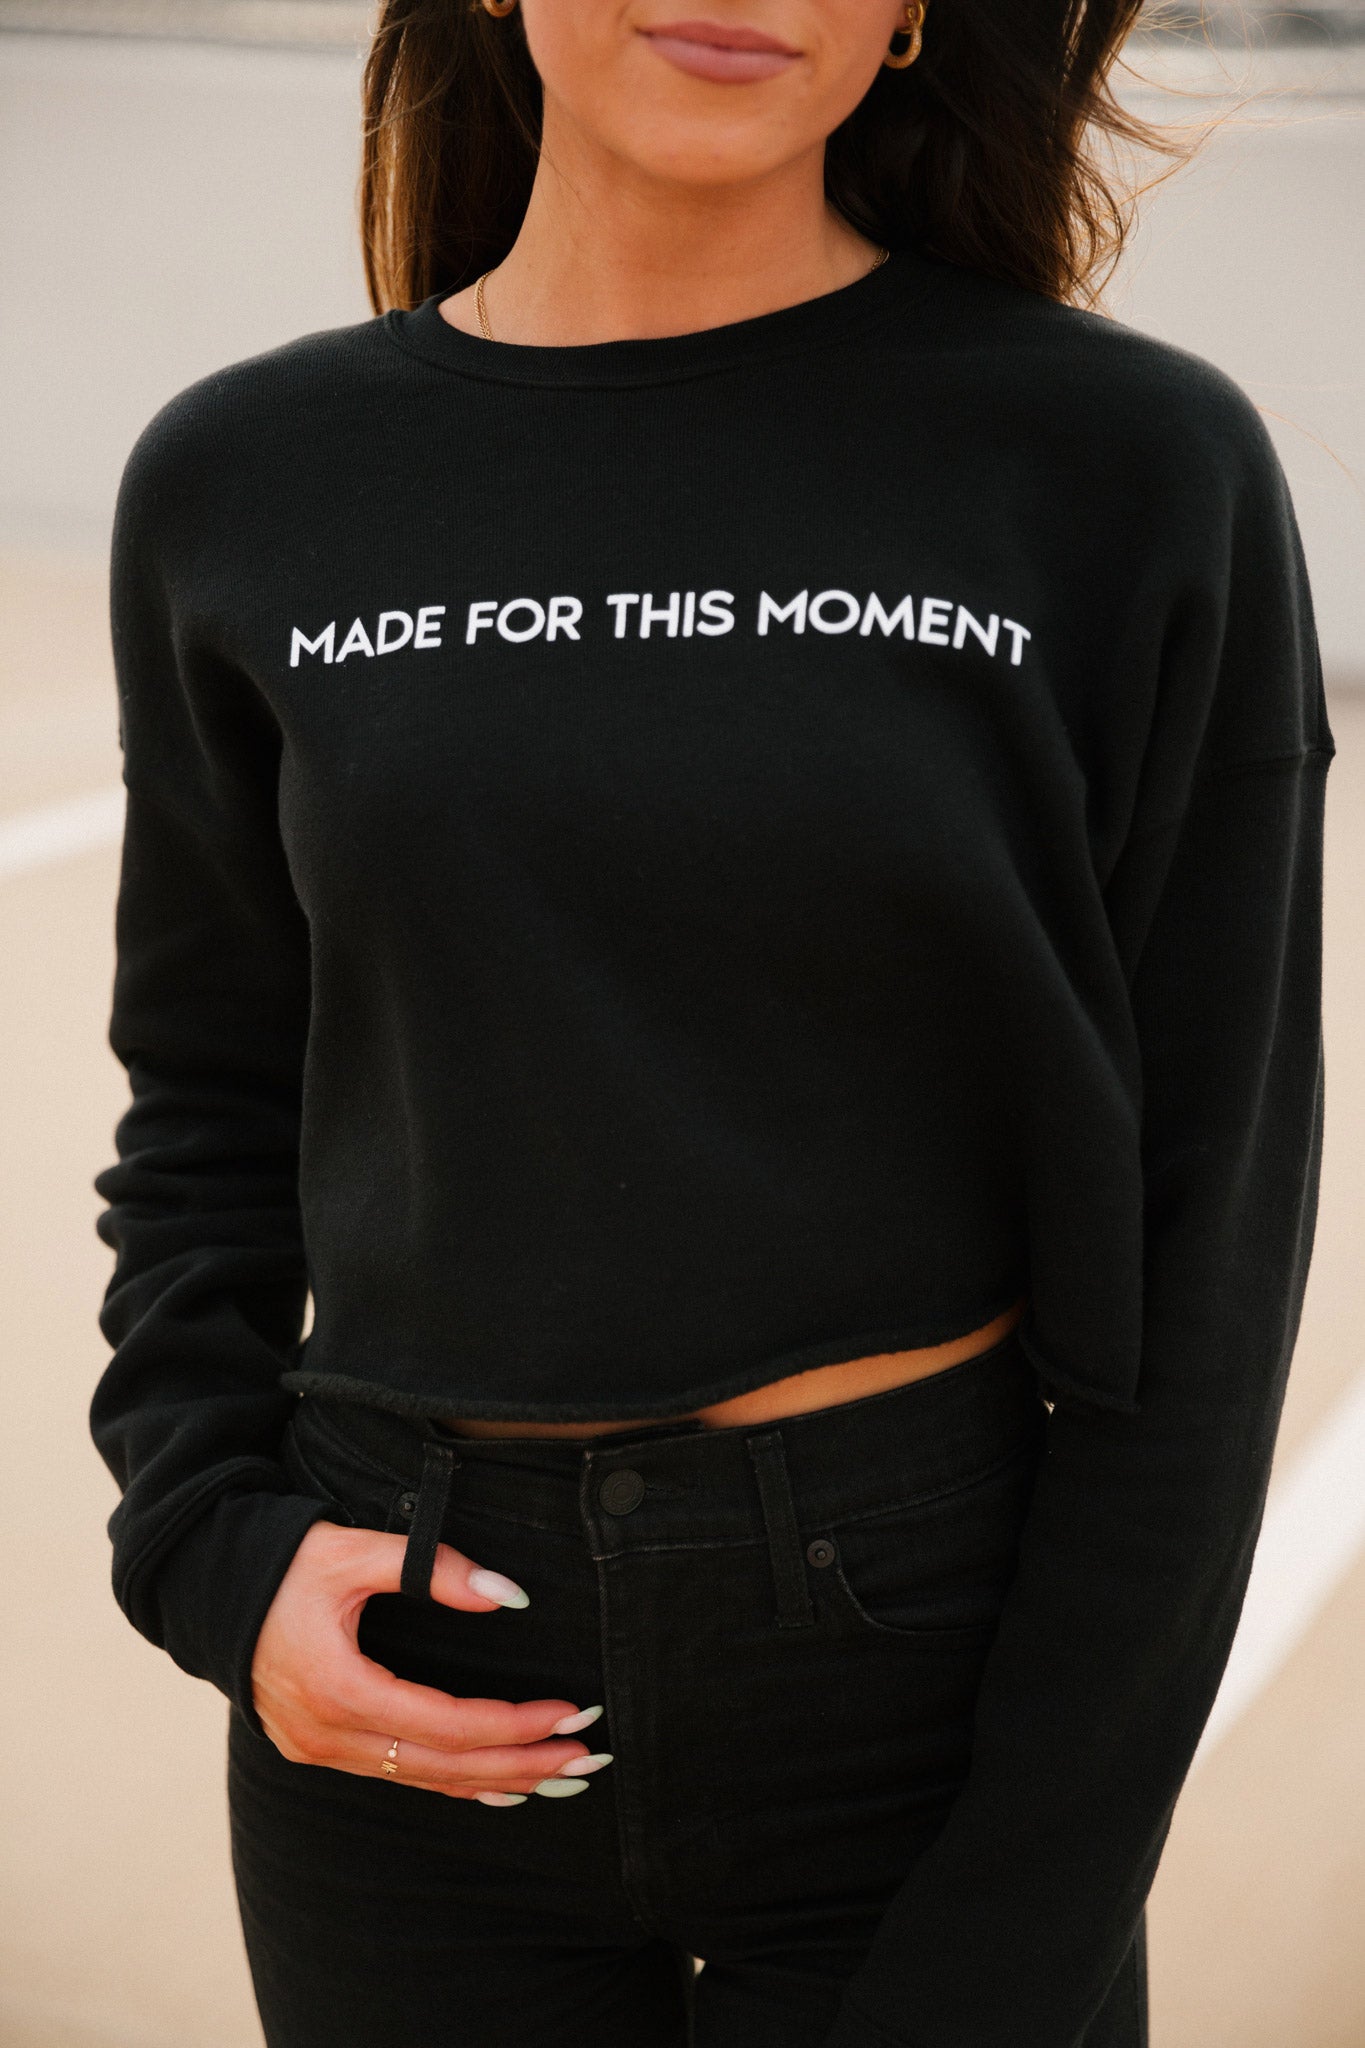 "Made for this Moment" Black Cropped Sweatshirt